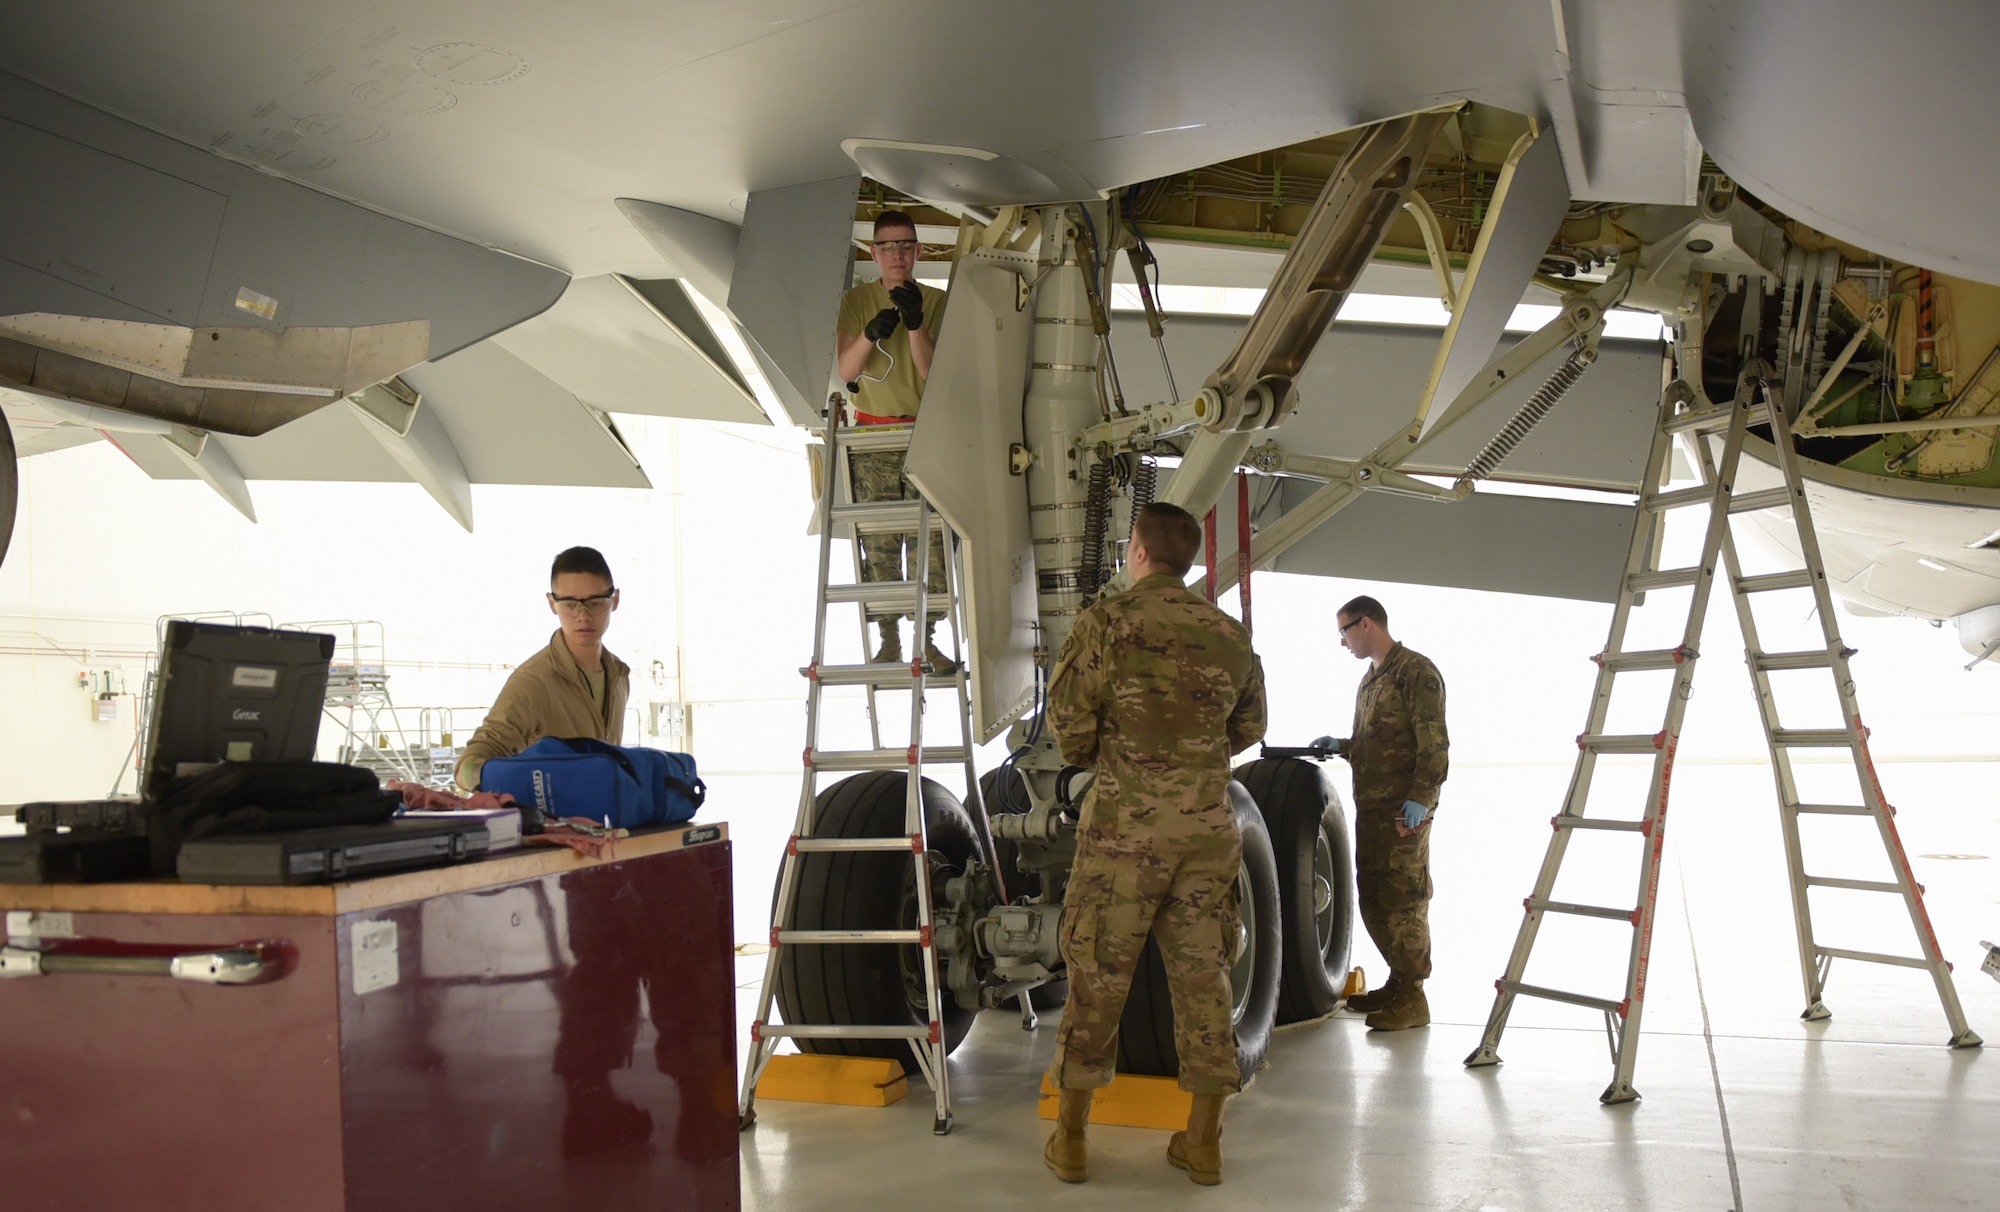 Twenty-Second Aircraft Maintenance Squadron crew chiefs perform an A-check on a KC-46A Pegasus March 20, 2019, at McConnell Air Force Base, Kan. A typical A-check is a 60-day maintenance inspection that focuses on the lubrication and inspection of critical aircraft components. (U.S. Air Force photo by Staff Sgt. Chris Thornbury)